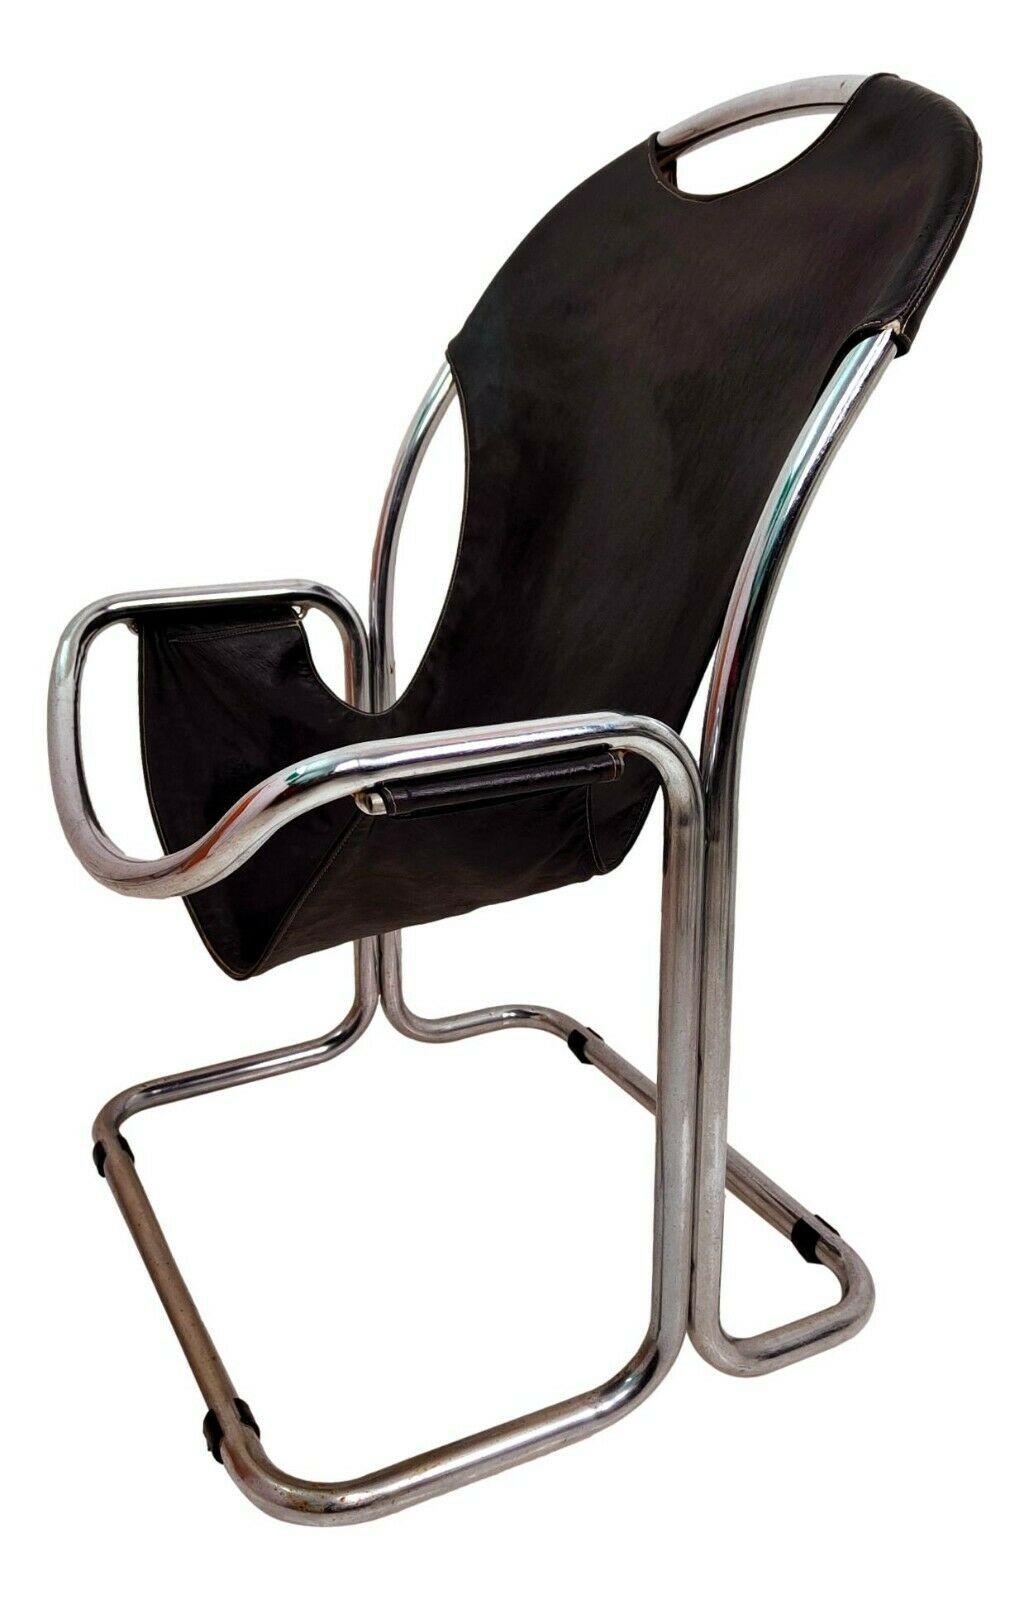 Late 20th Century Bauhaus Style Tubular Metal and Eco-Leather Collectible Chair, 1970s For Sale